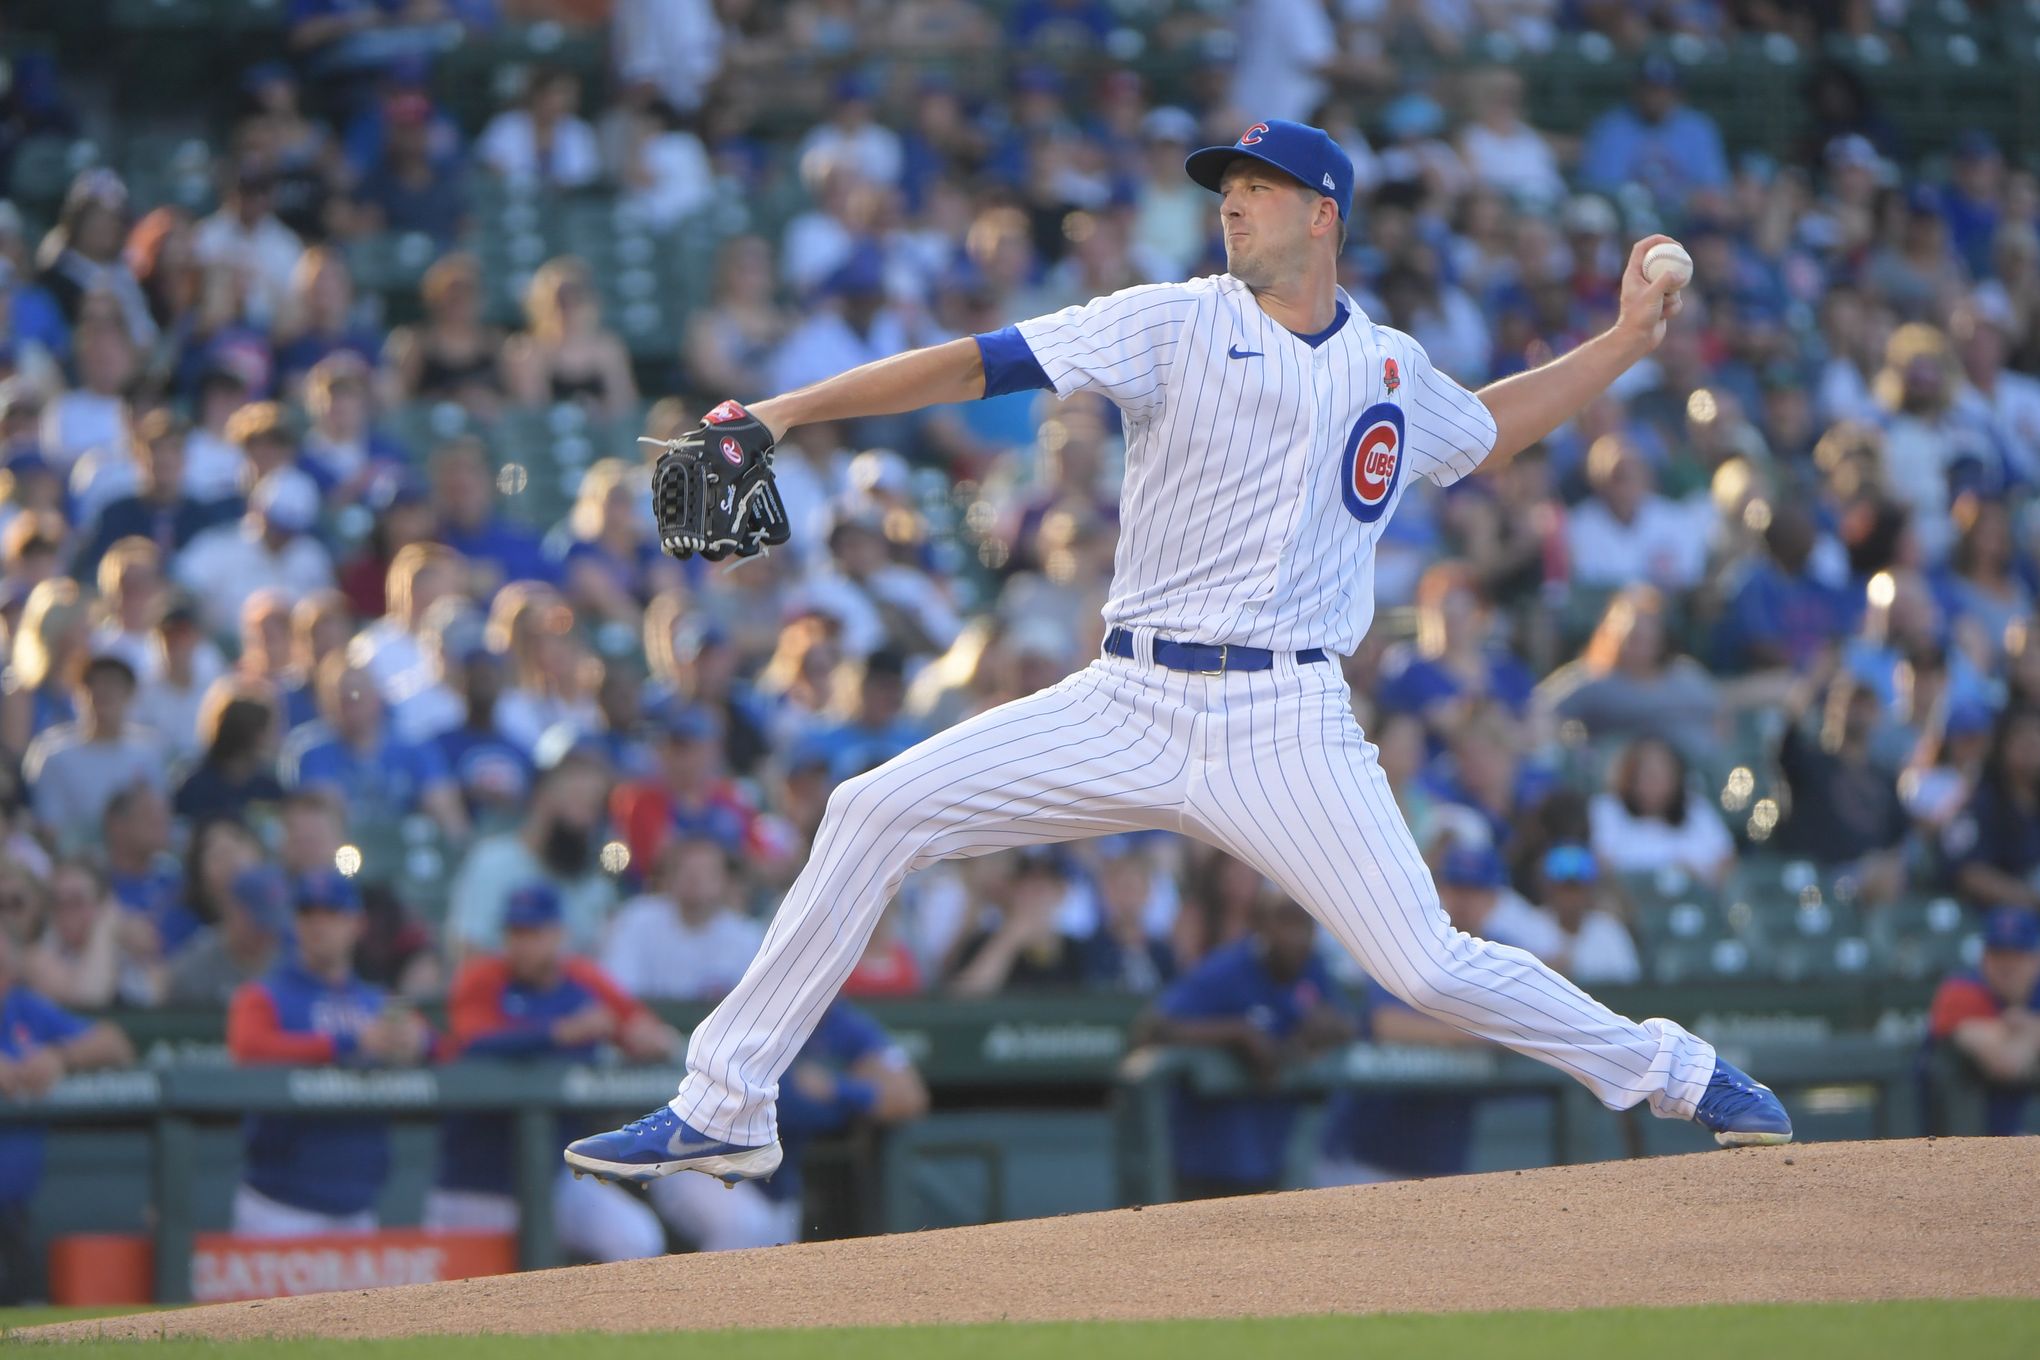 Cubs place lefty Smyly on 15-day IL with strained oblique